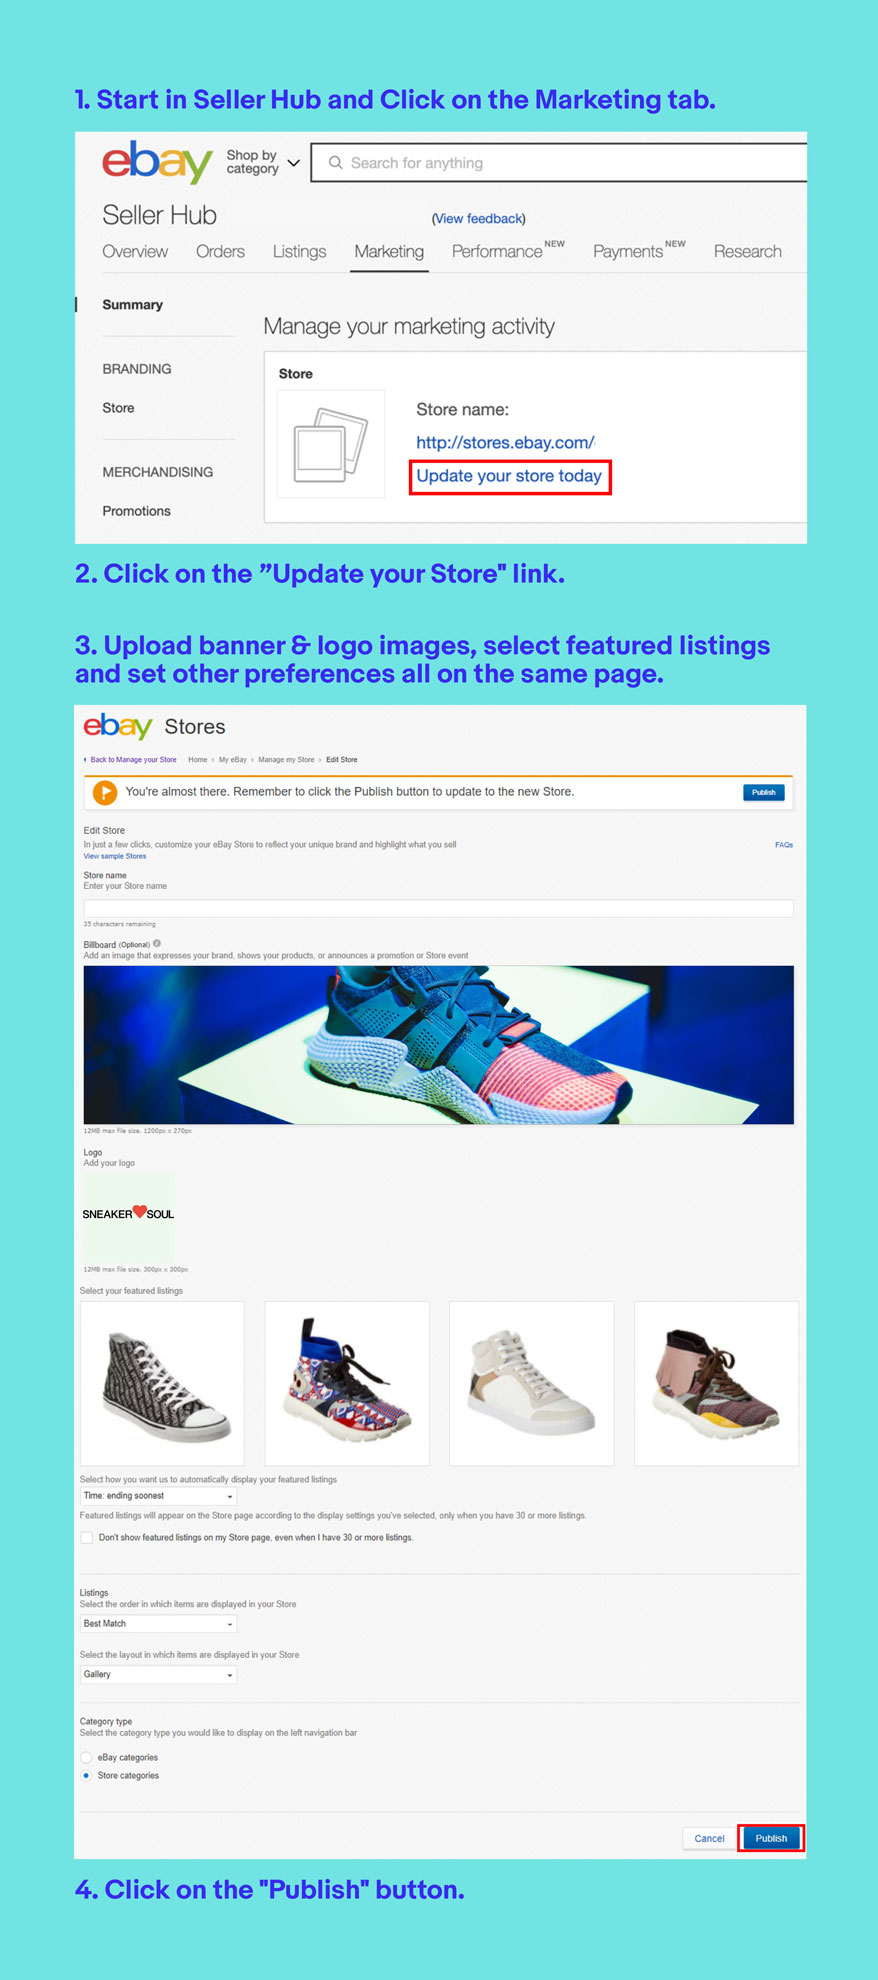 edit your store: steps 1 - 4